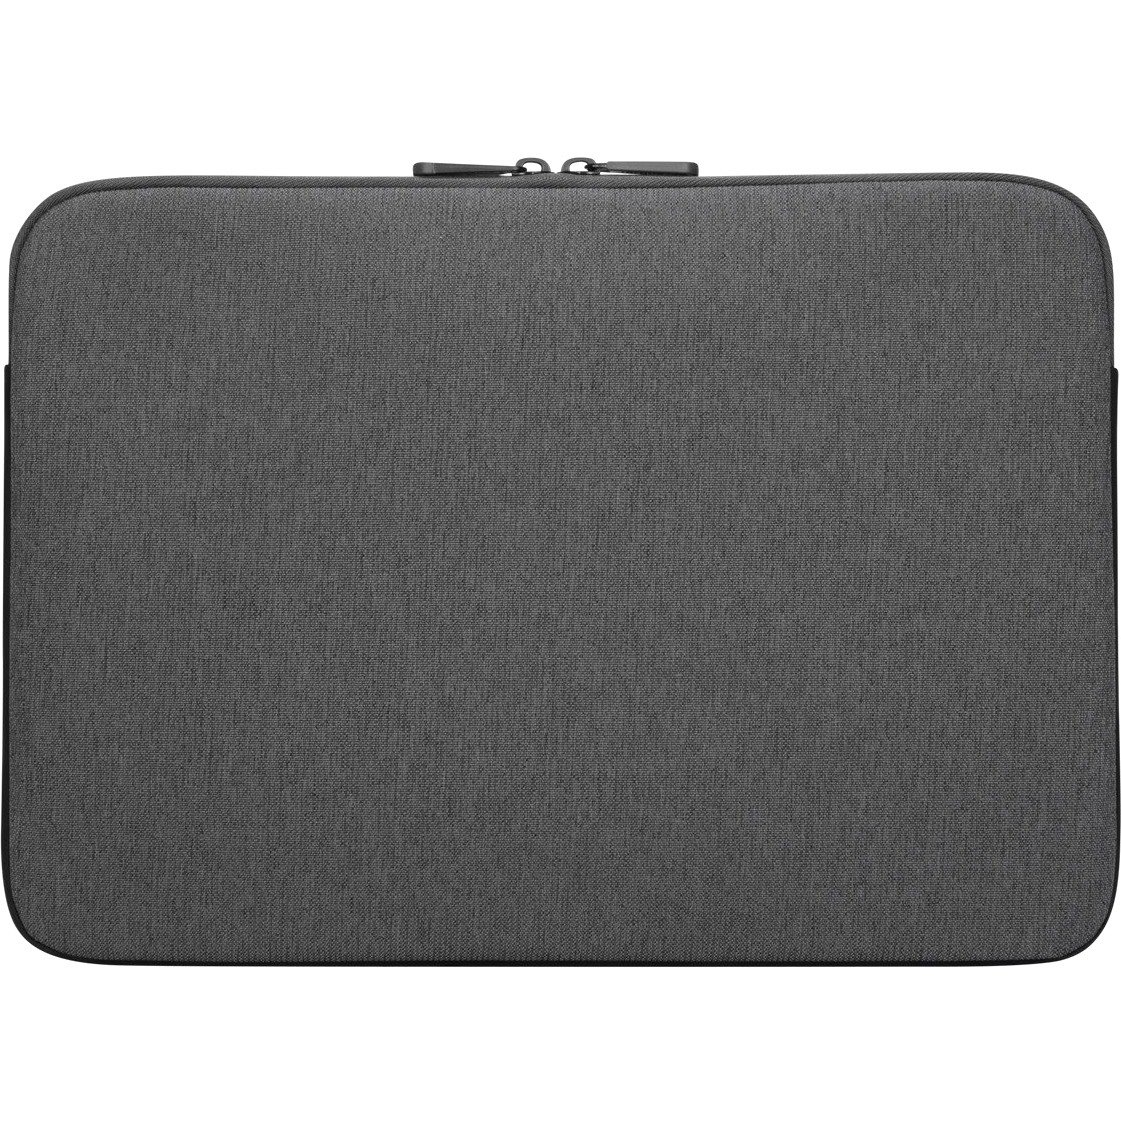 Targus Cypress TBS64602GL Carrying Case (Sleeve) for 33 cm (13") to 35.6 cm (14") Notebook - Grey